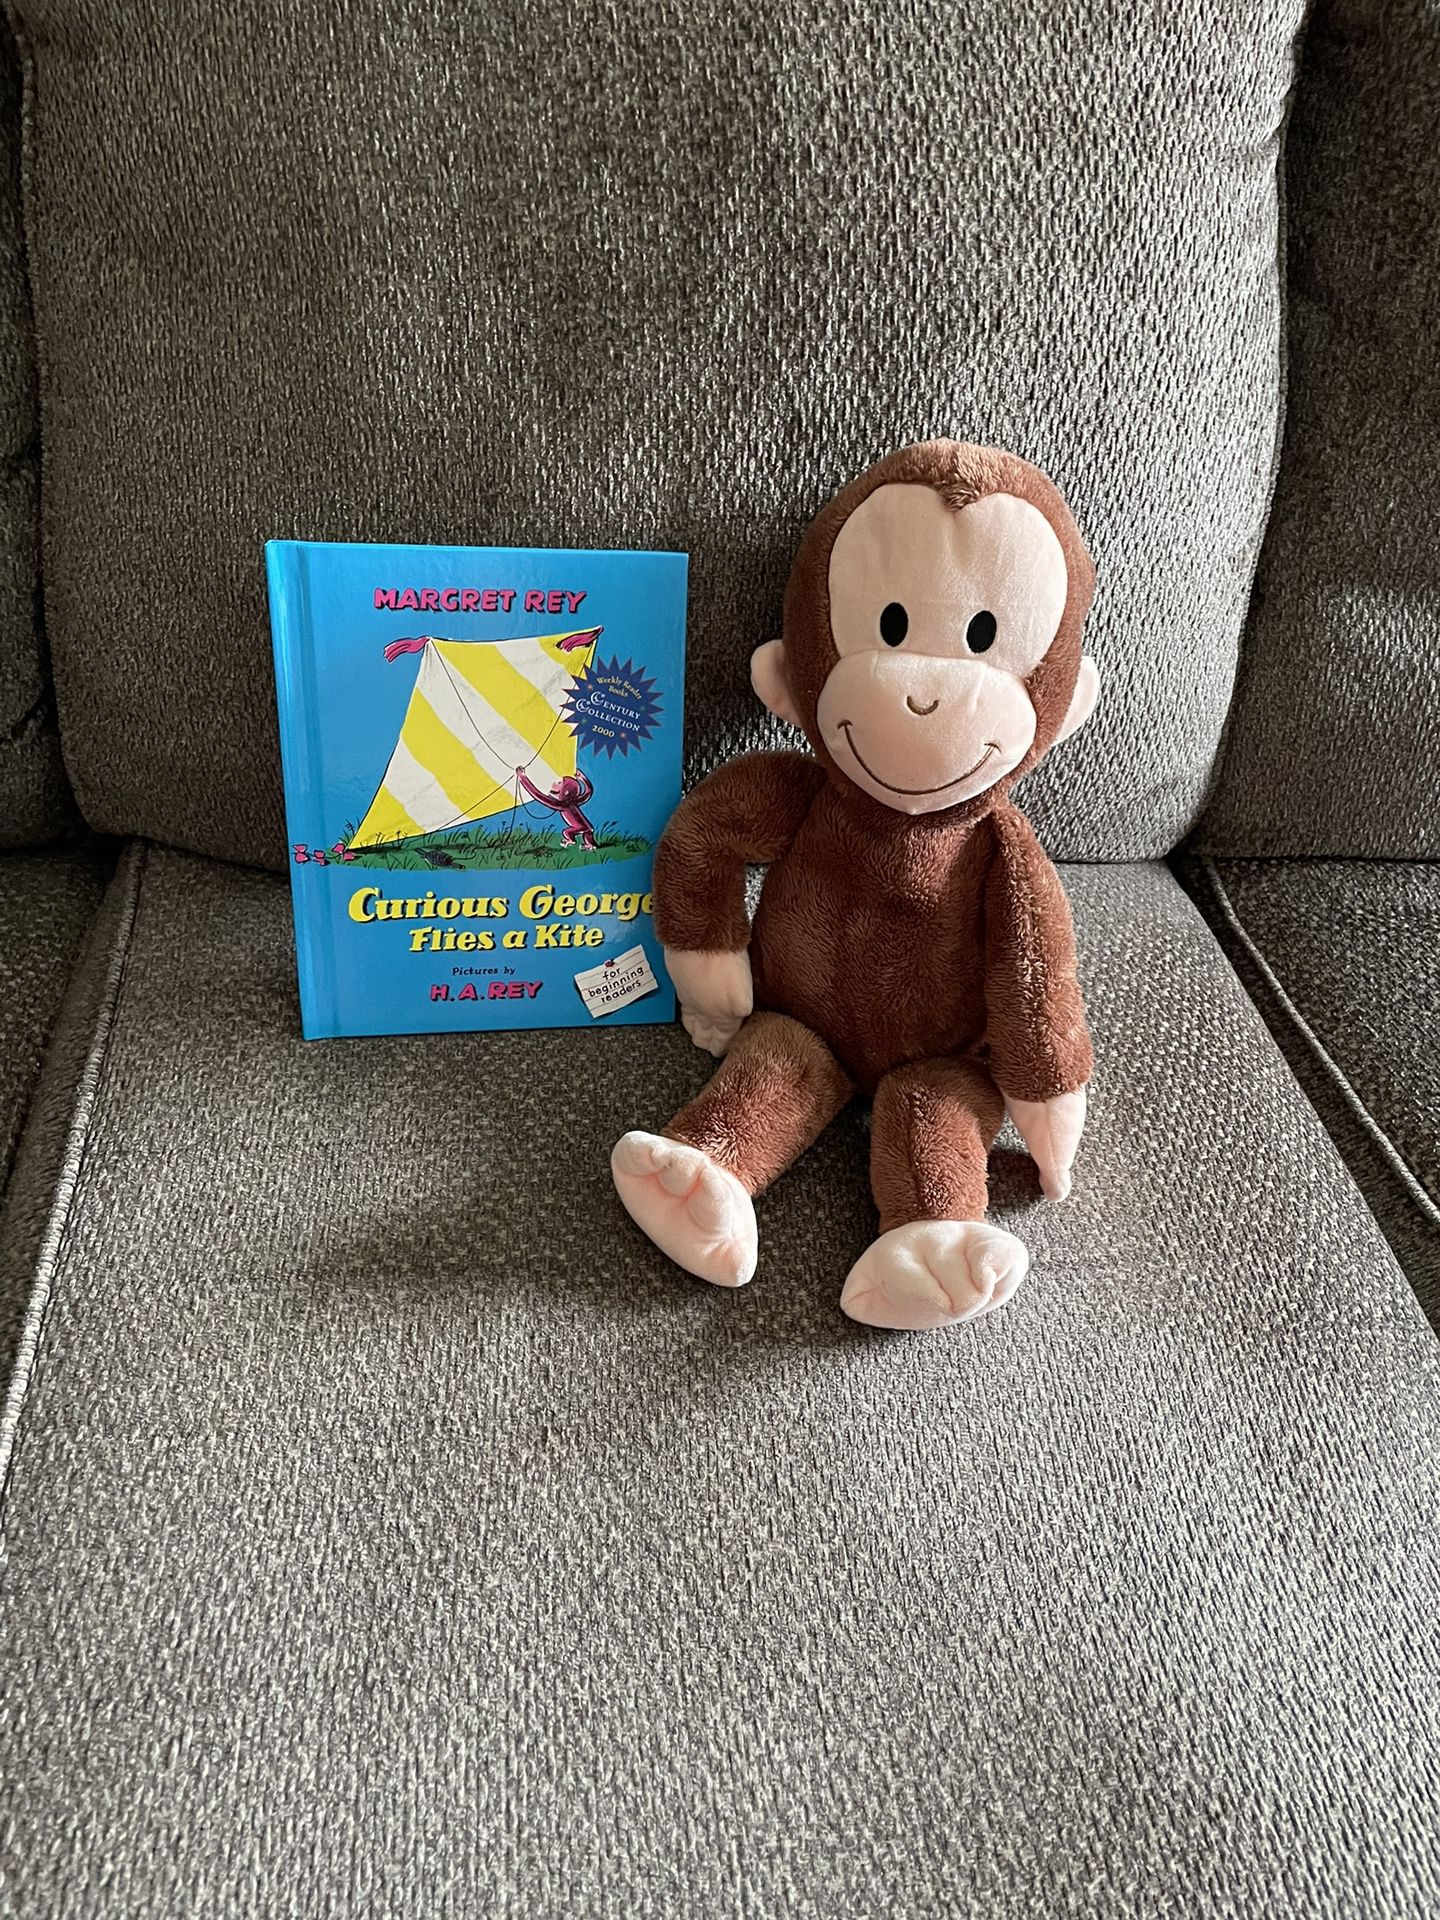 Curious George plush toy with hardback book